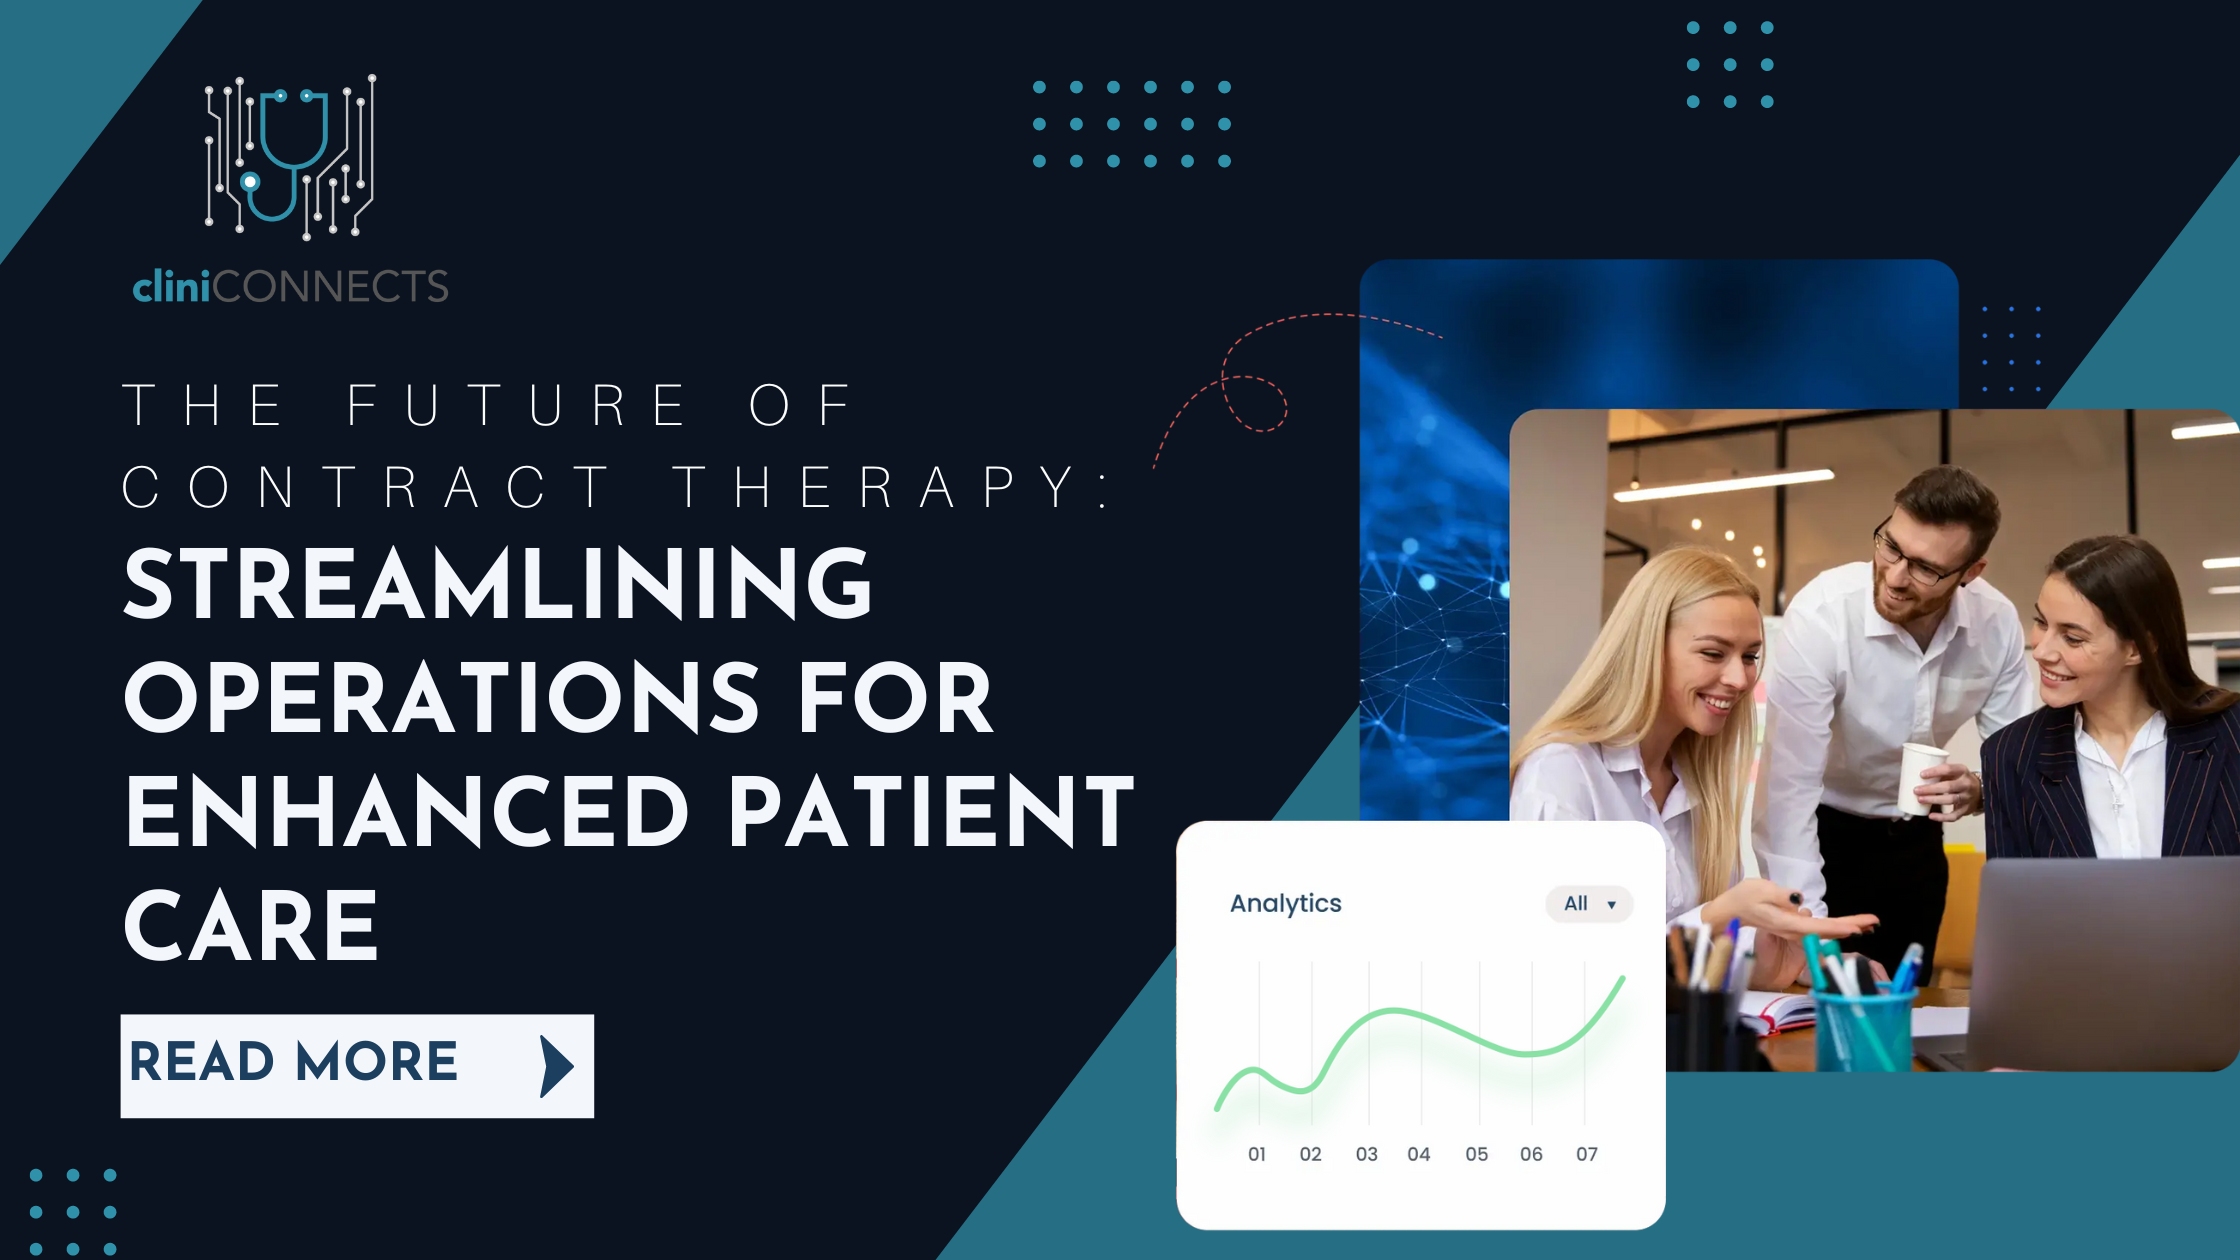 The Future of Contract Therapy: Streamlining Operations for Enhanced Patient Care